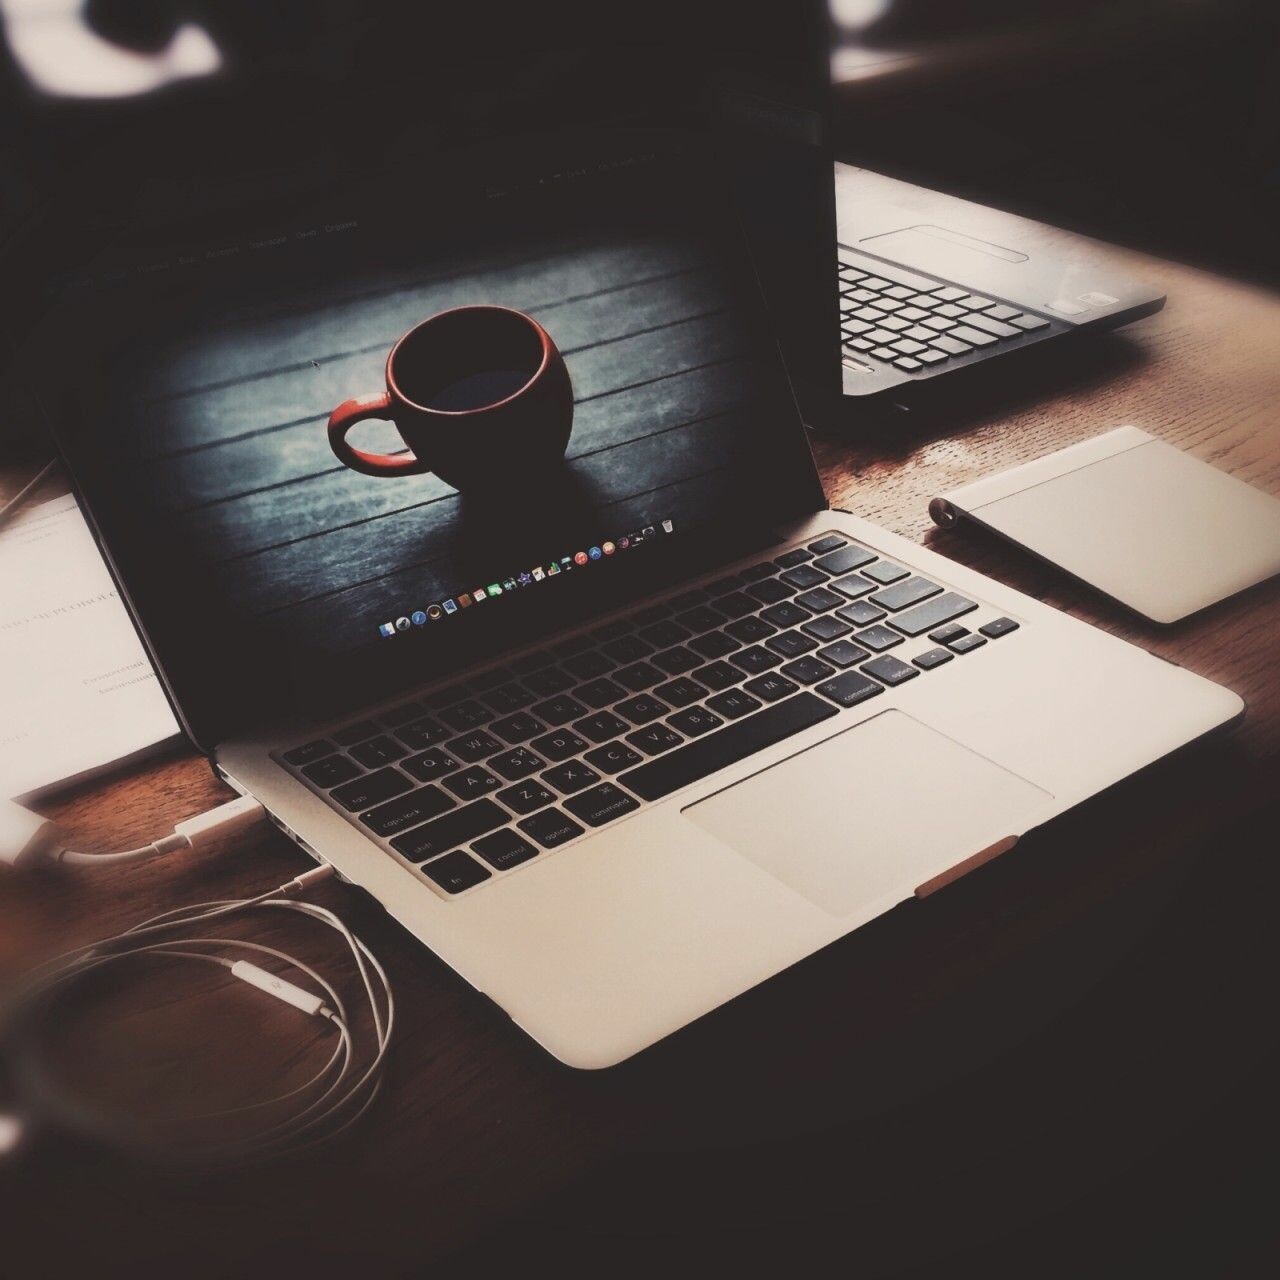 Cup of black coffee by laptop on black background - Stock Photo - Dissolve